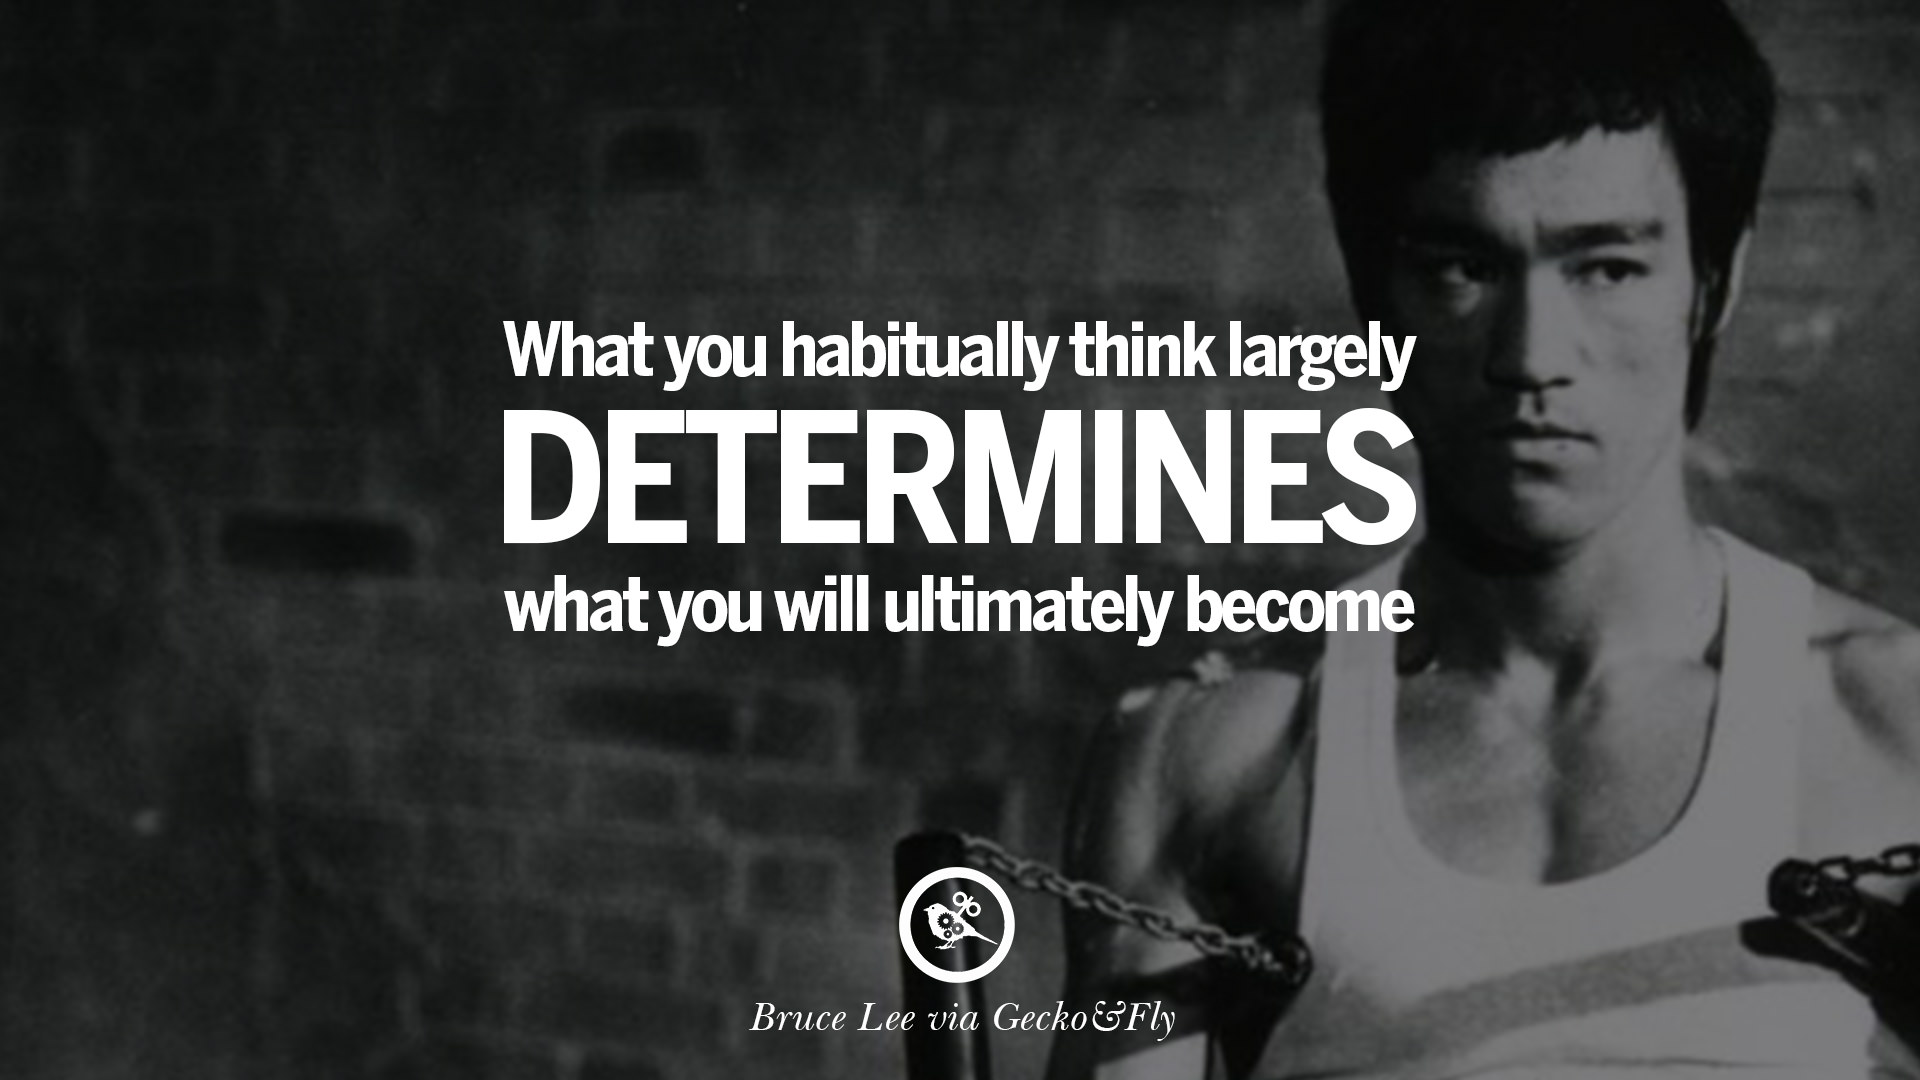 bruce-lee-kung-fu-quotes-26.jpg